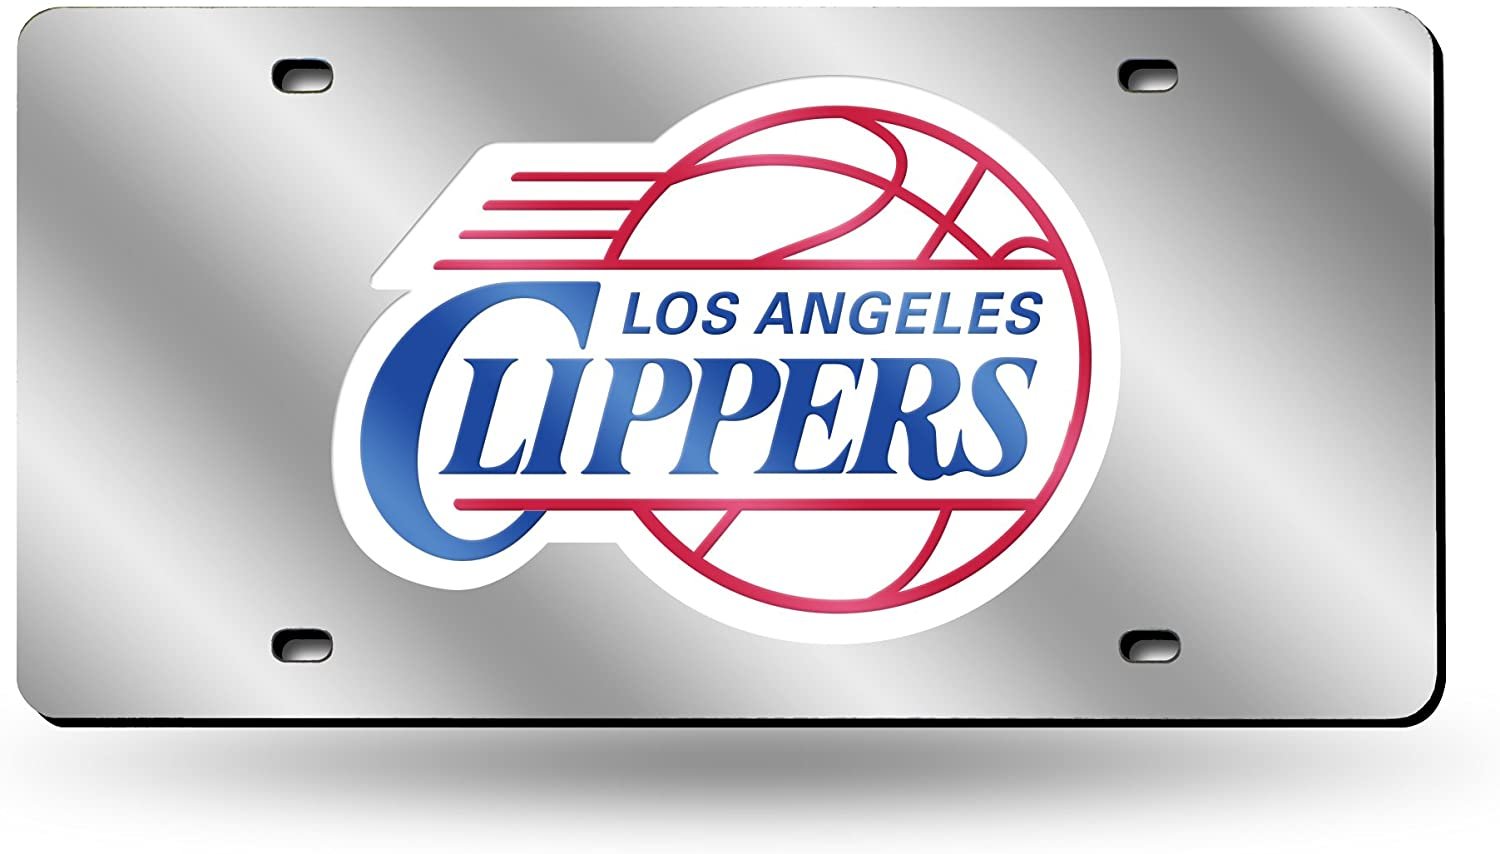 Los Angeles Clippers Premium Laser Cut Tag License Plate, Mirrored Acrylic Inlaid, 12x6 Inch